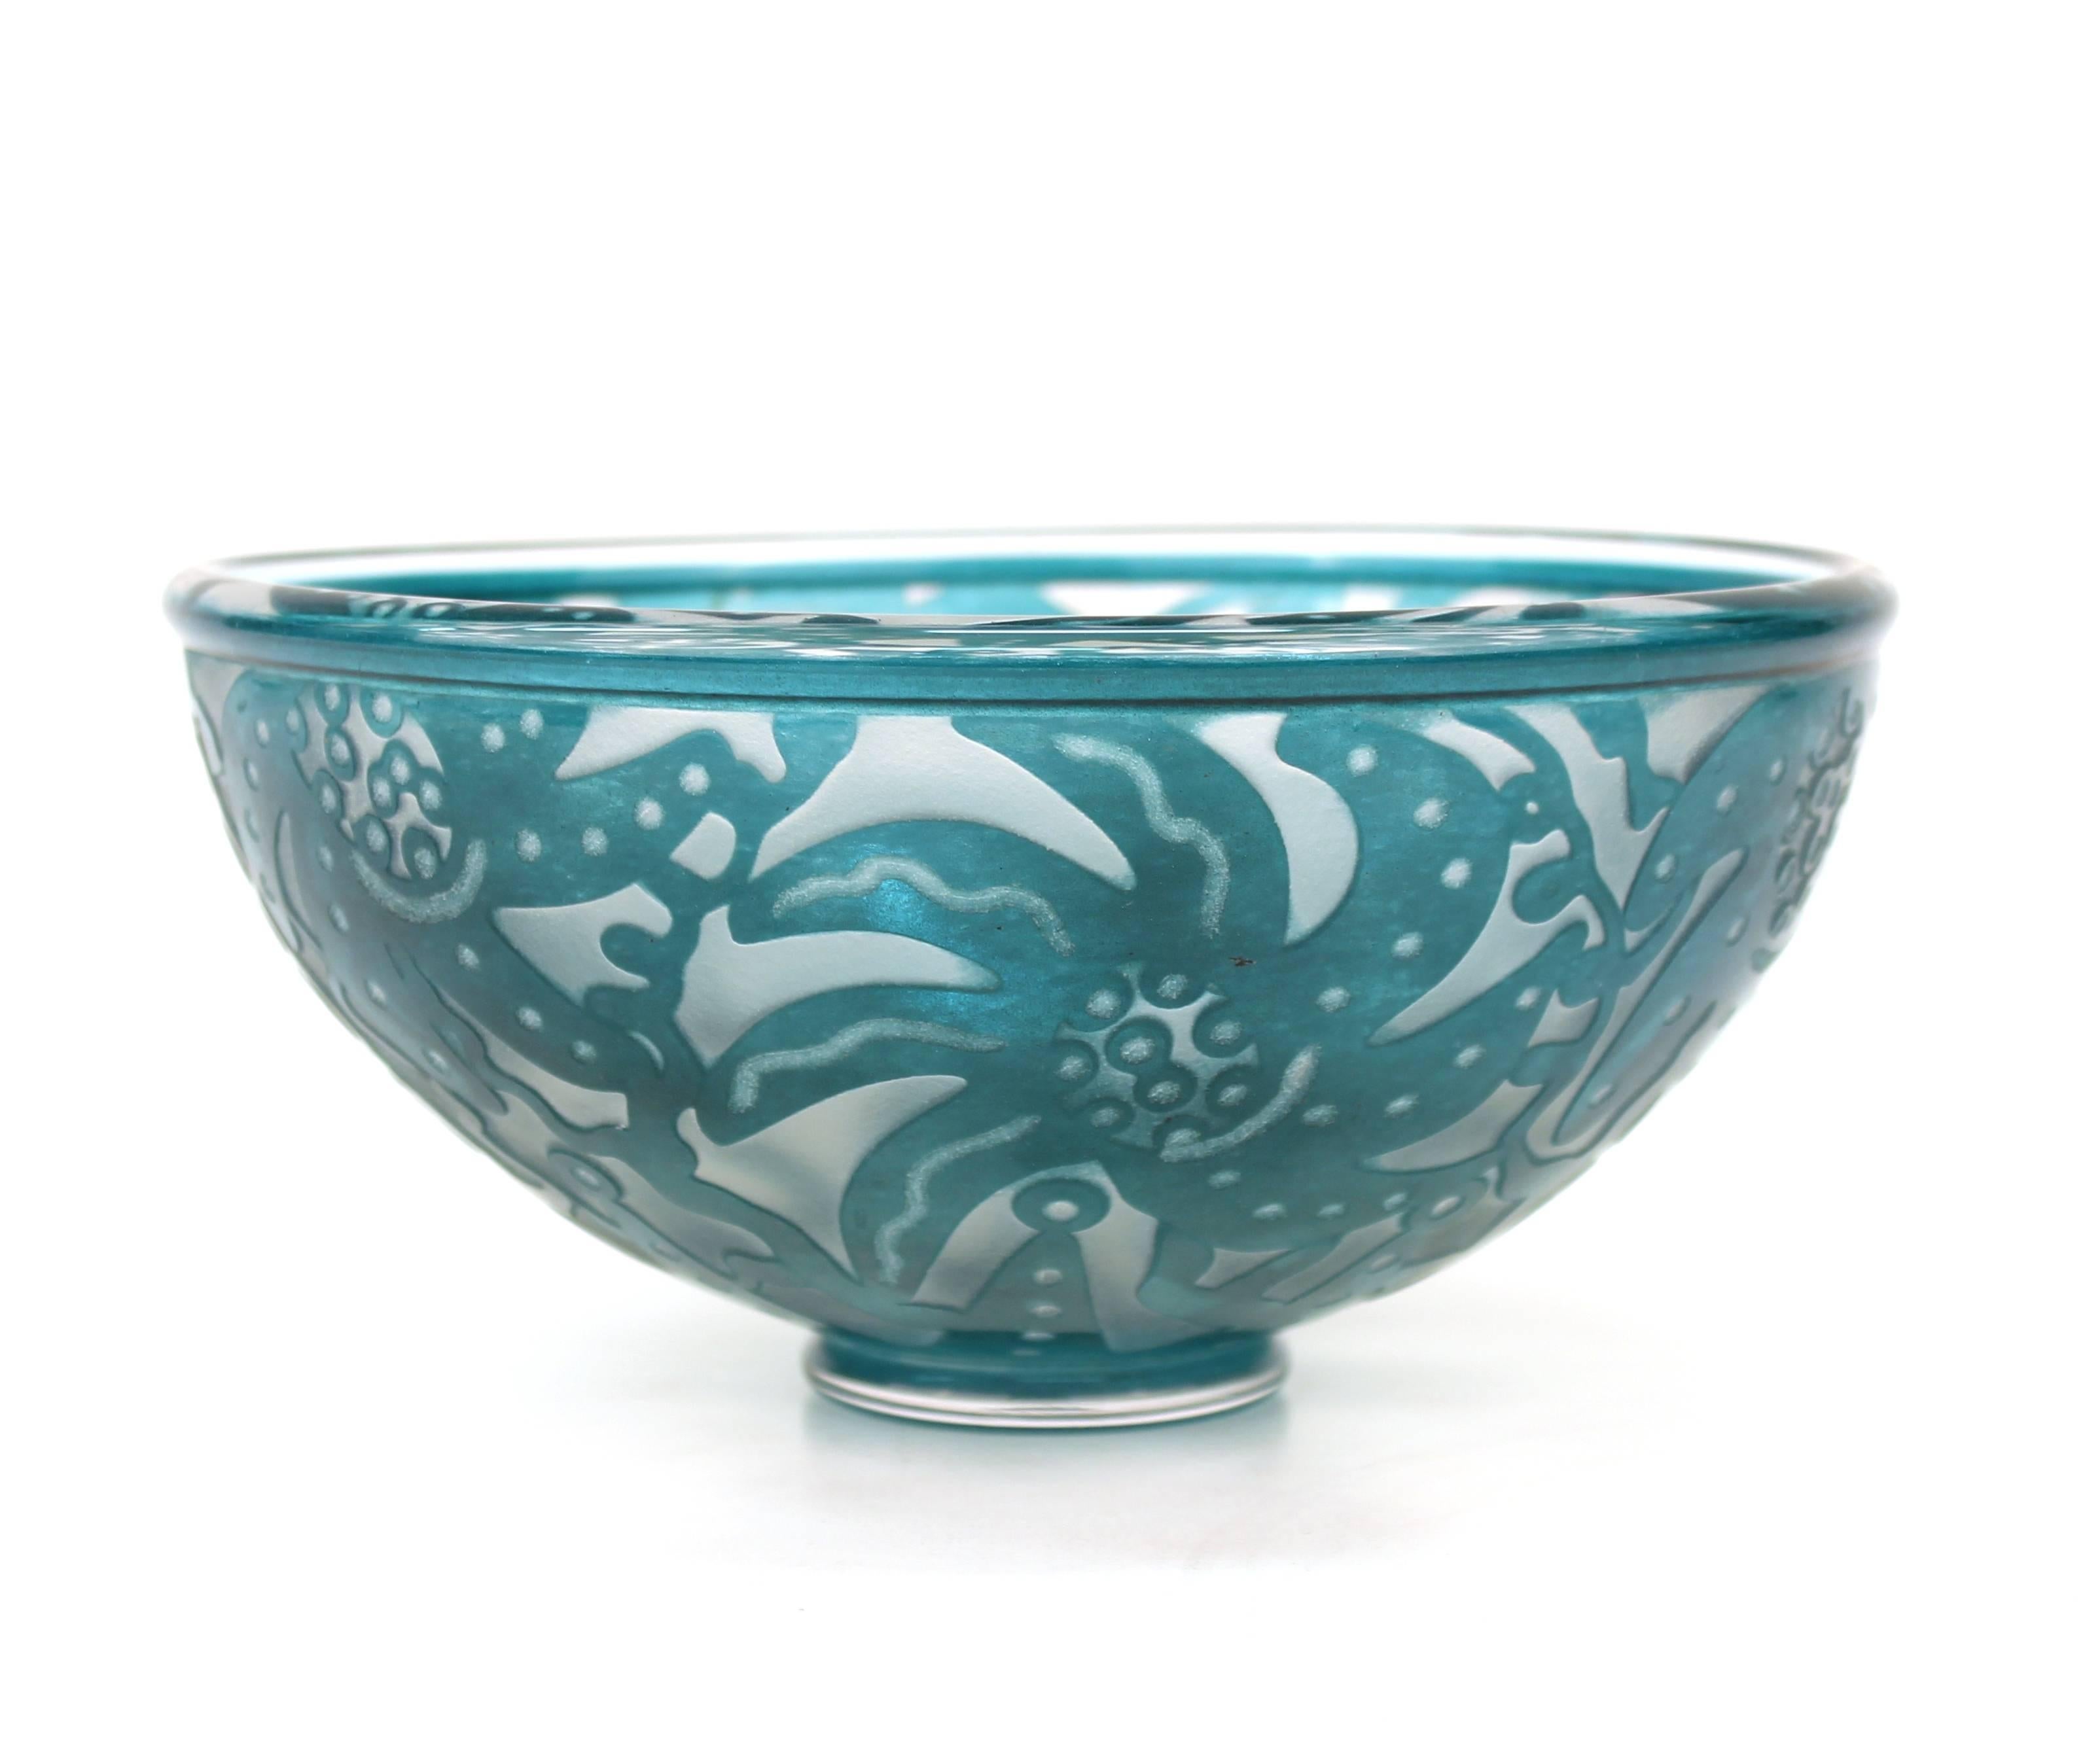 Modernist studio art glass bowl in blue. Designed with pattern of stylized flowers and leaves. Illegibly signed on base. Wear appropriate to age and use. The bowl remains in good vintage condition. 